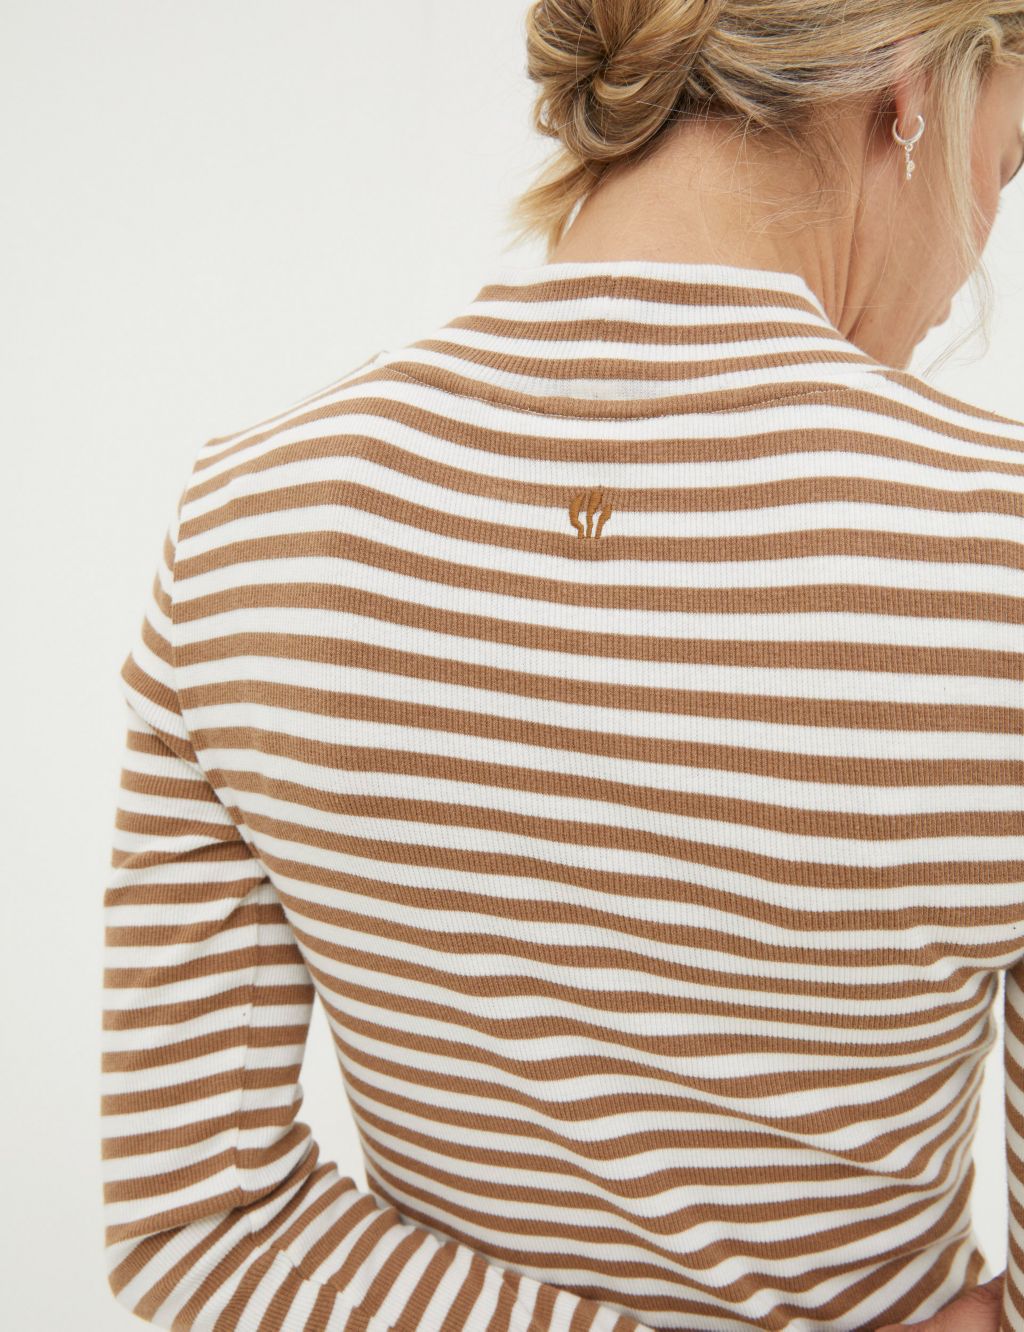 Cotton Rich Striped Ribbed Top image 3